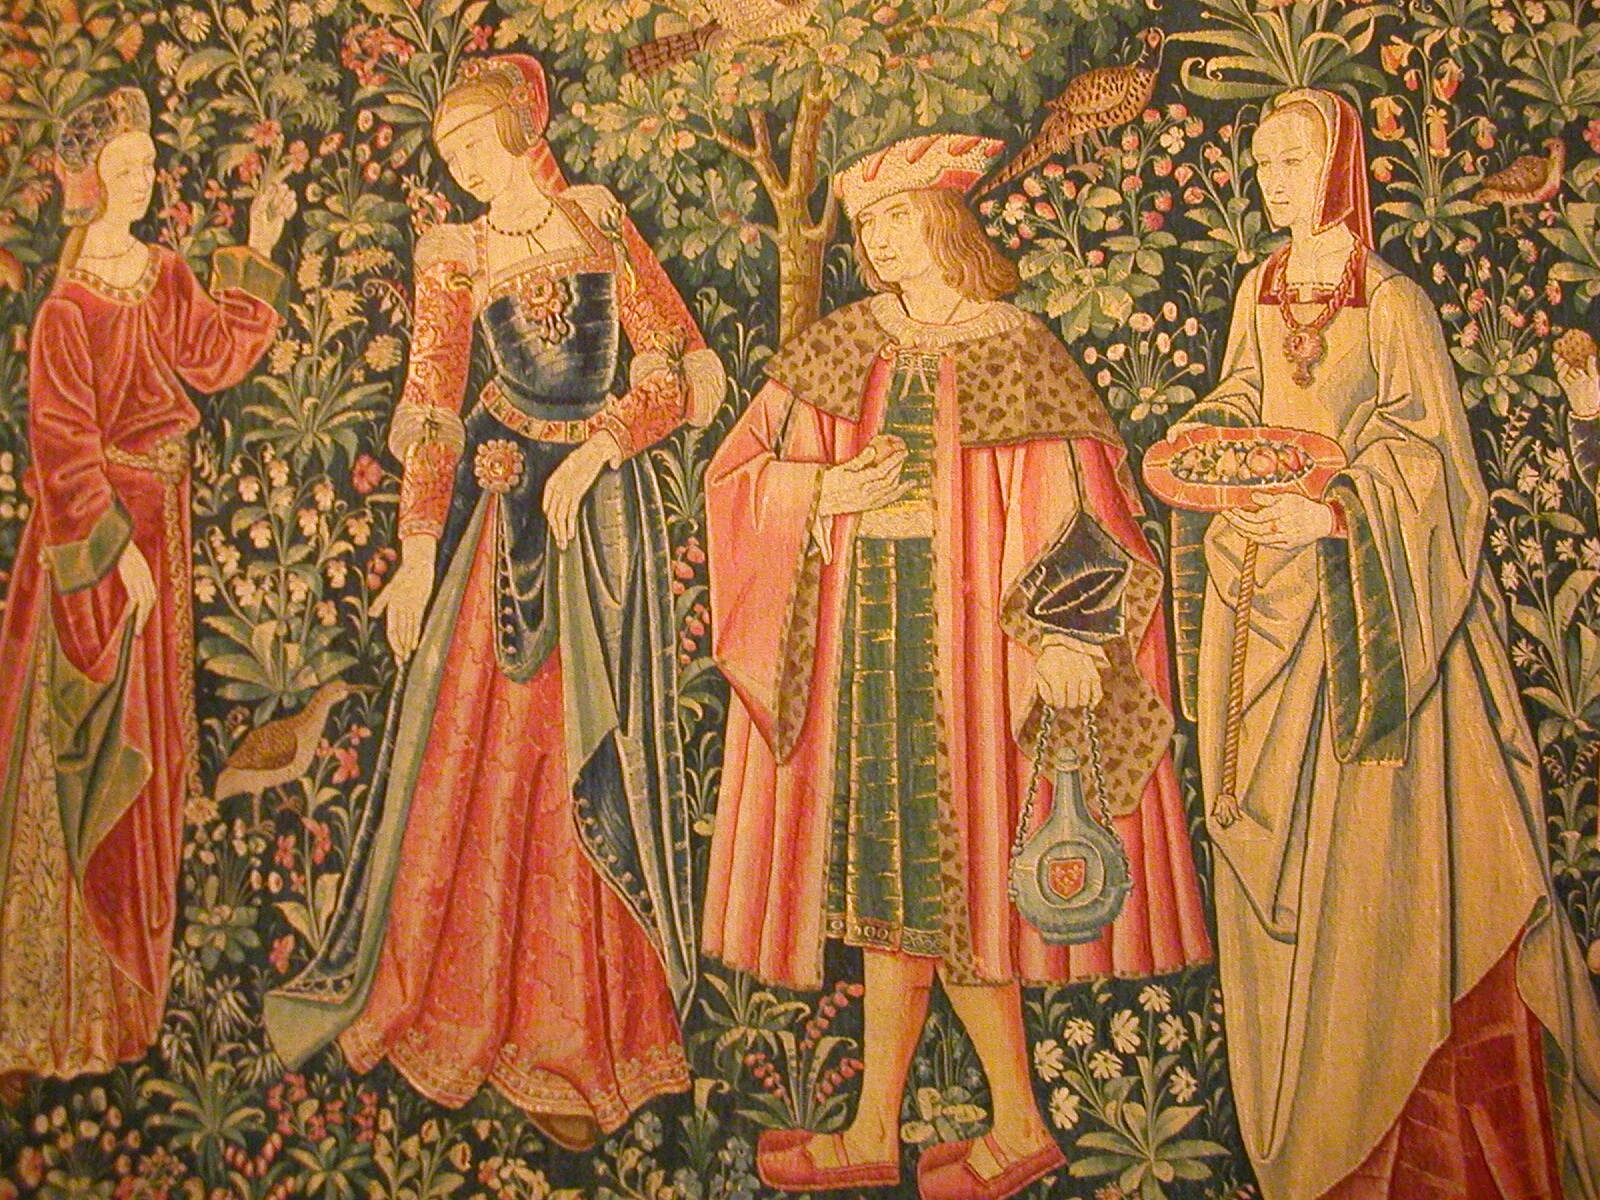 1500 (approx) - Tapestry of Court life - the promenade - at Cluny museum